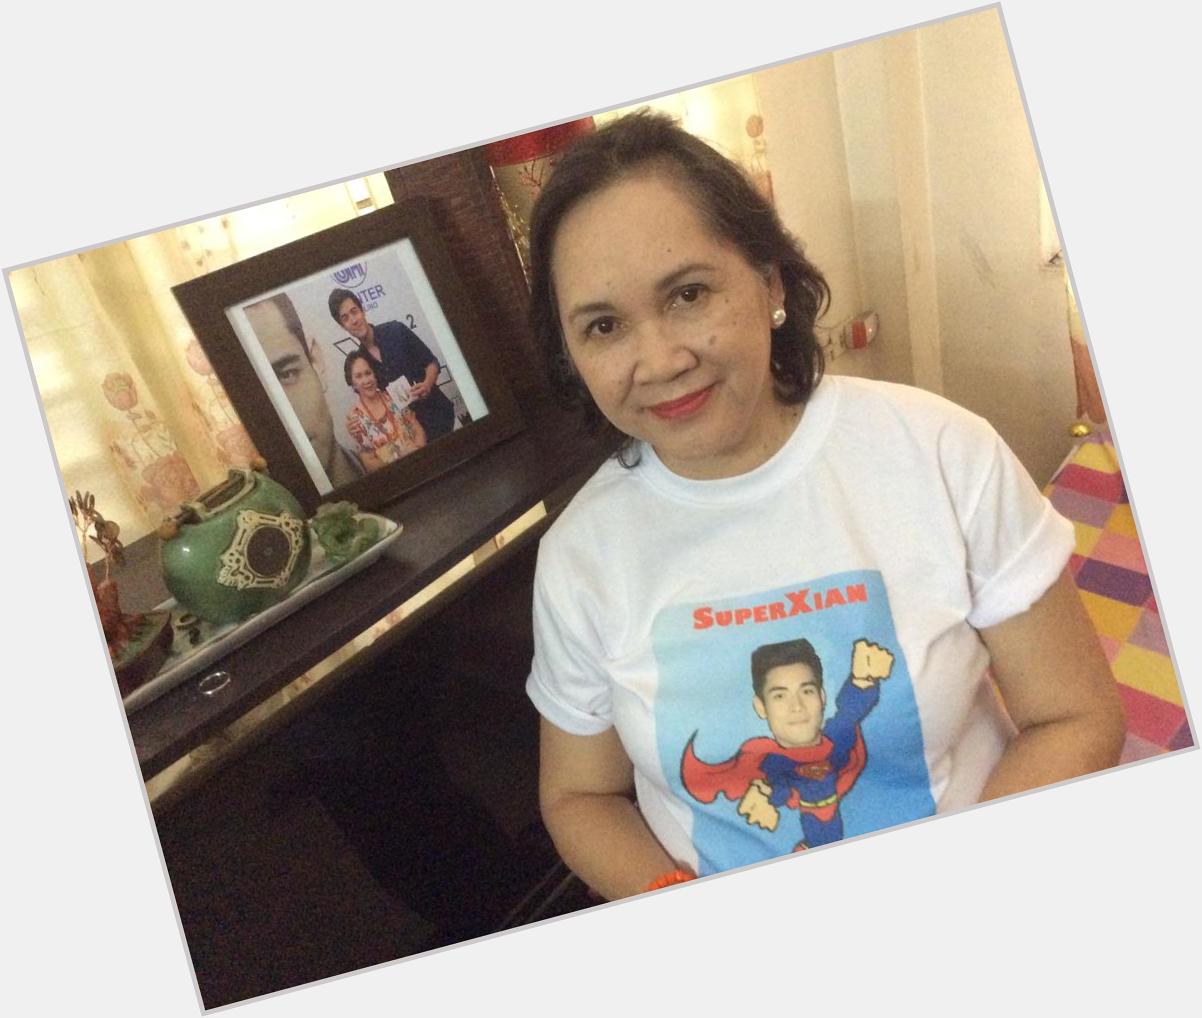  My mom\s message : A blessed Birthday to u XIAN LIM! God loves u.THANK U FOR MAKING US HAPPY! U are AMAZING 